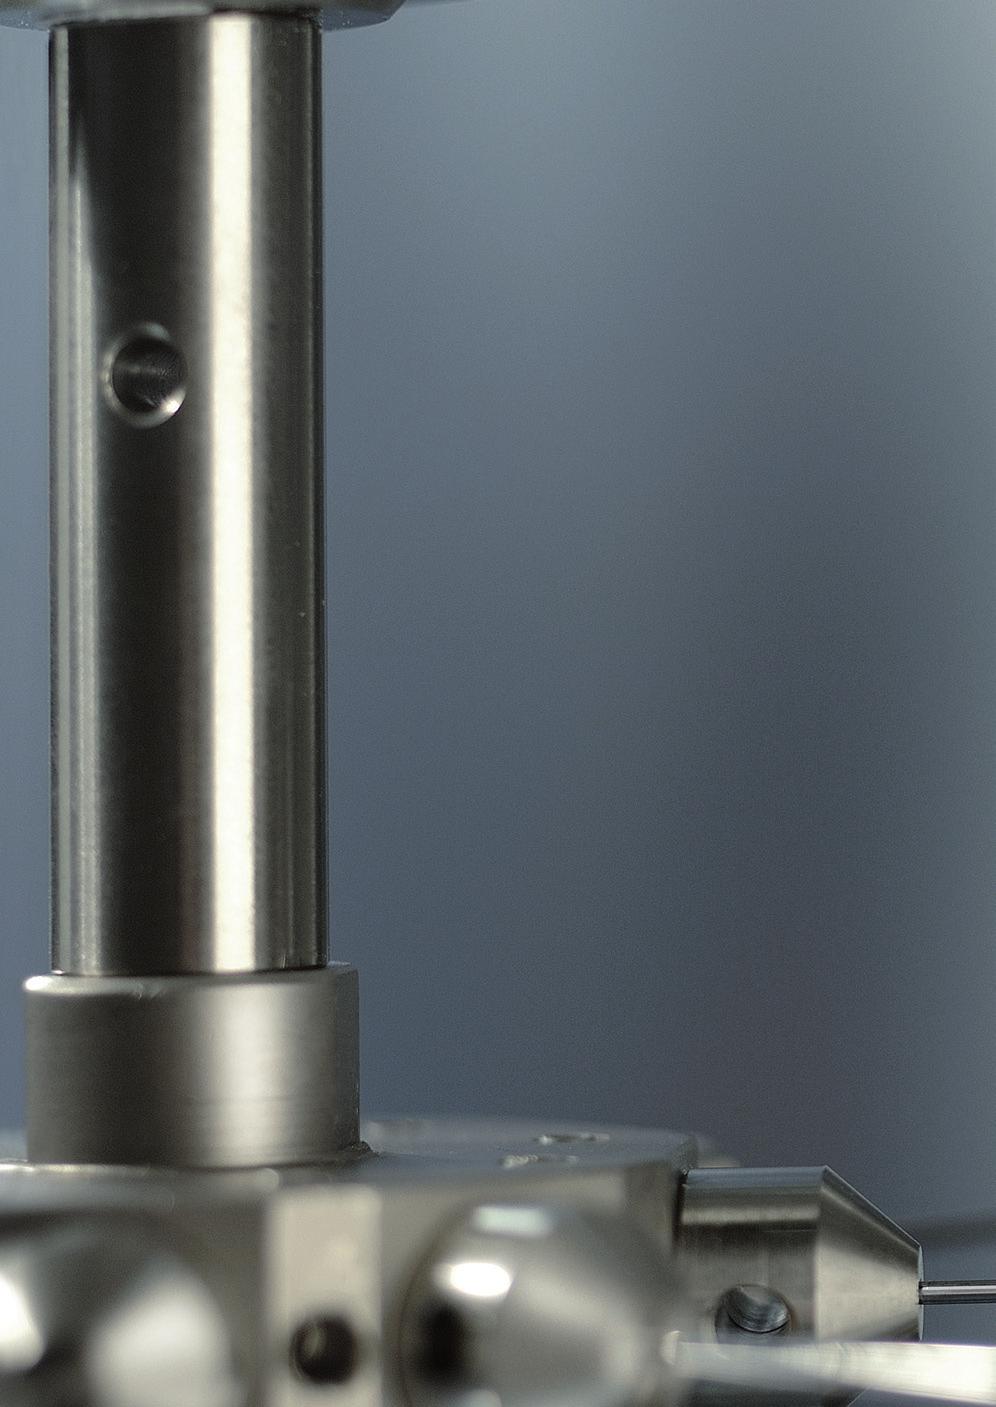 Born From Experience Hexagon Metrology s comprehensive range of probes, probe heads, styli changers and accessories for Coordinate Measuring Machines (CMMs) represents the latest evolution in probing